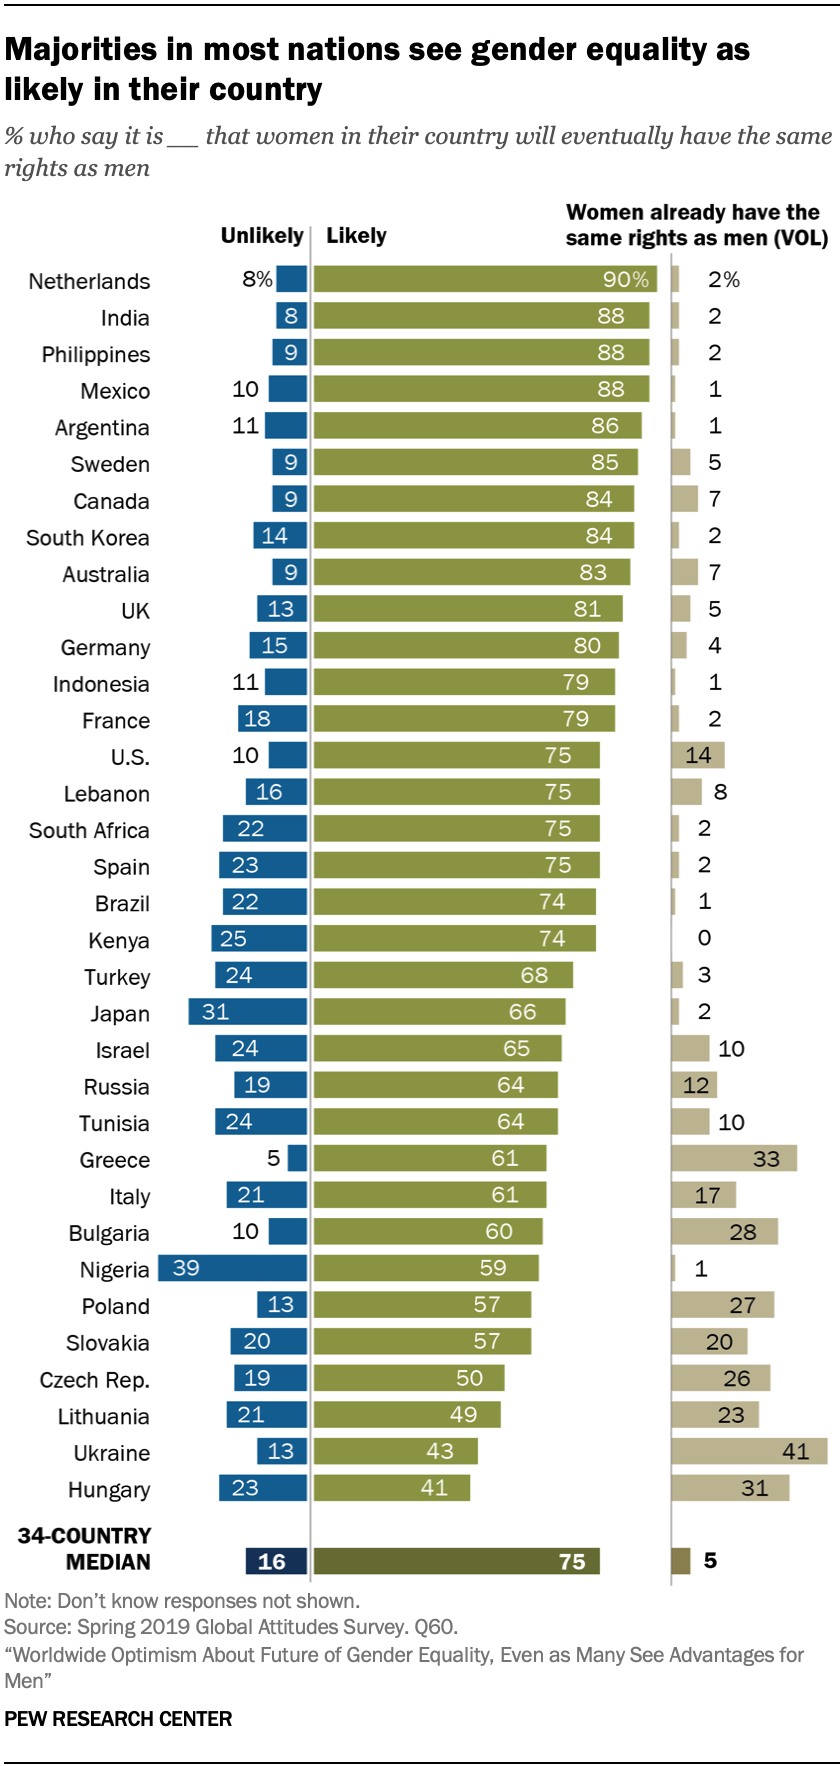 Majorities in most nations see gender equality as likely in their country